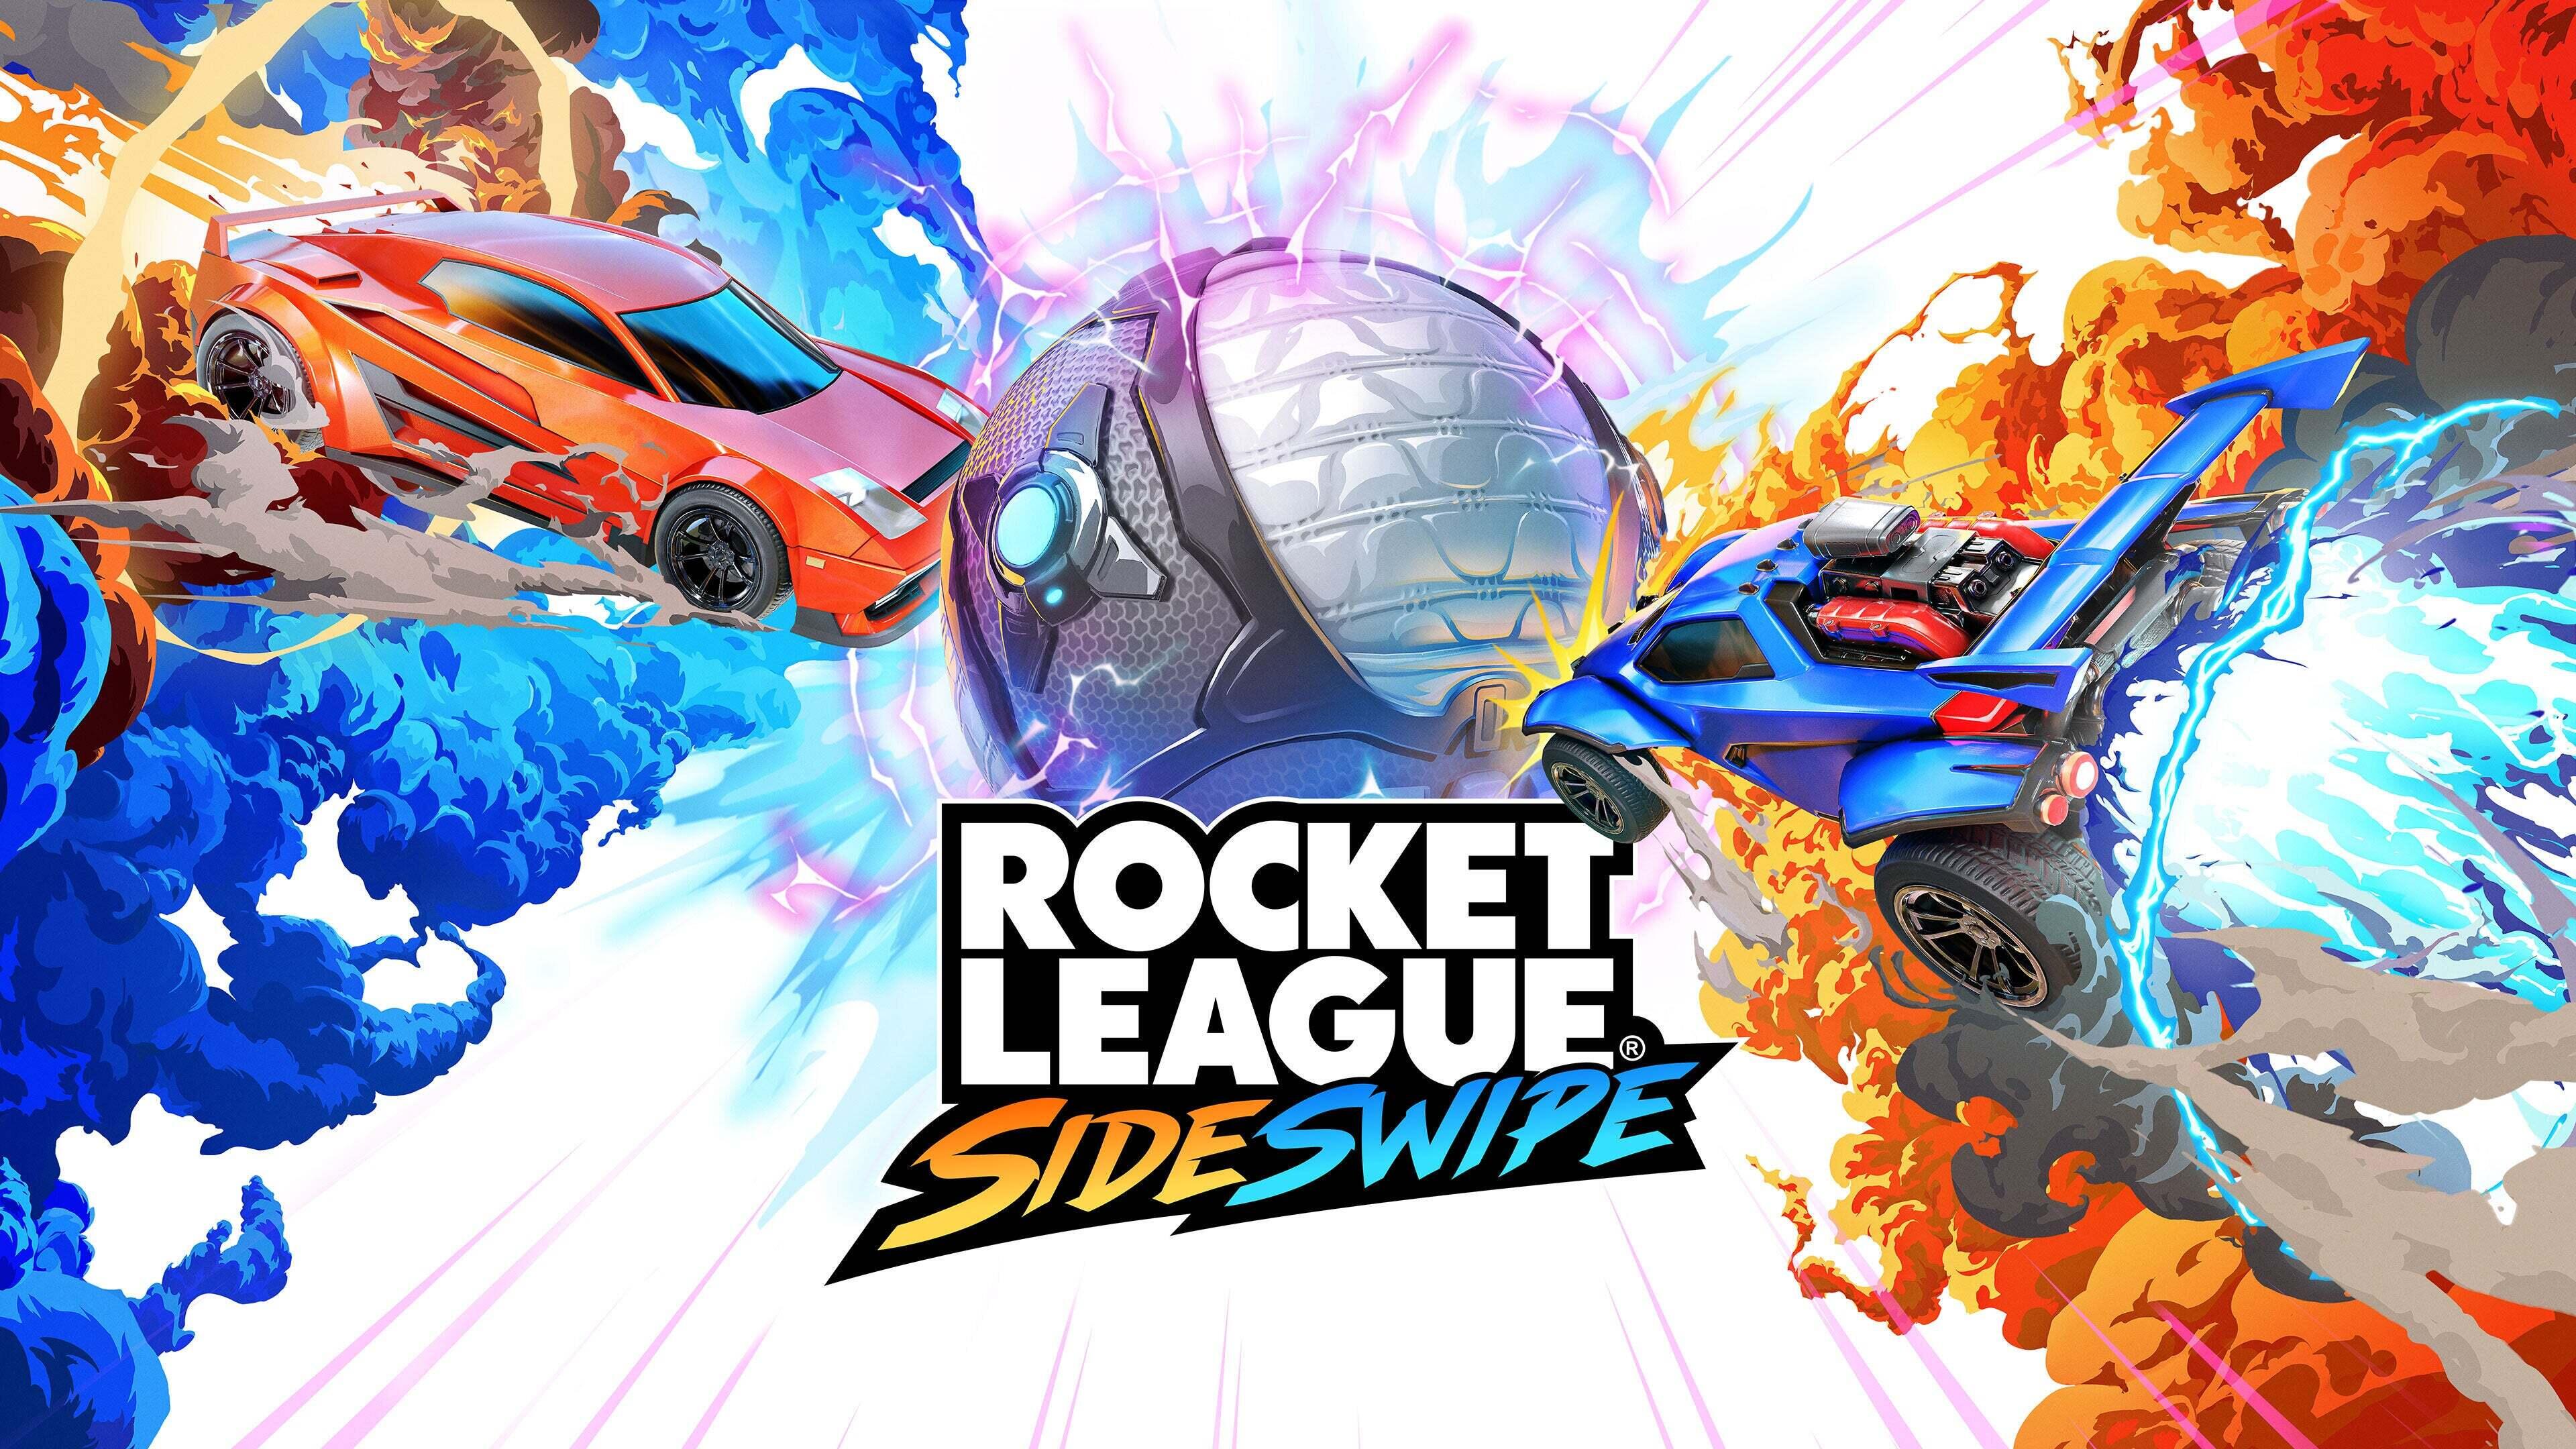 Rocket League Sideswipe guide the best tips and tricks to play like a pro